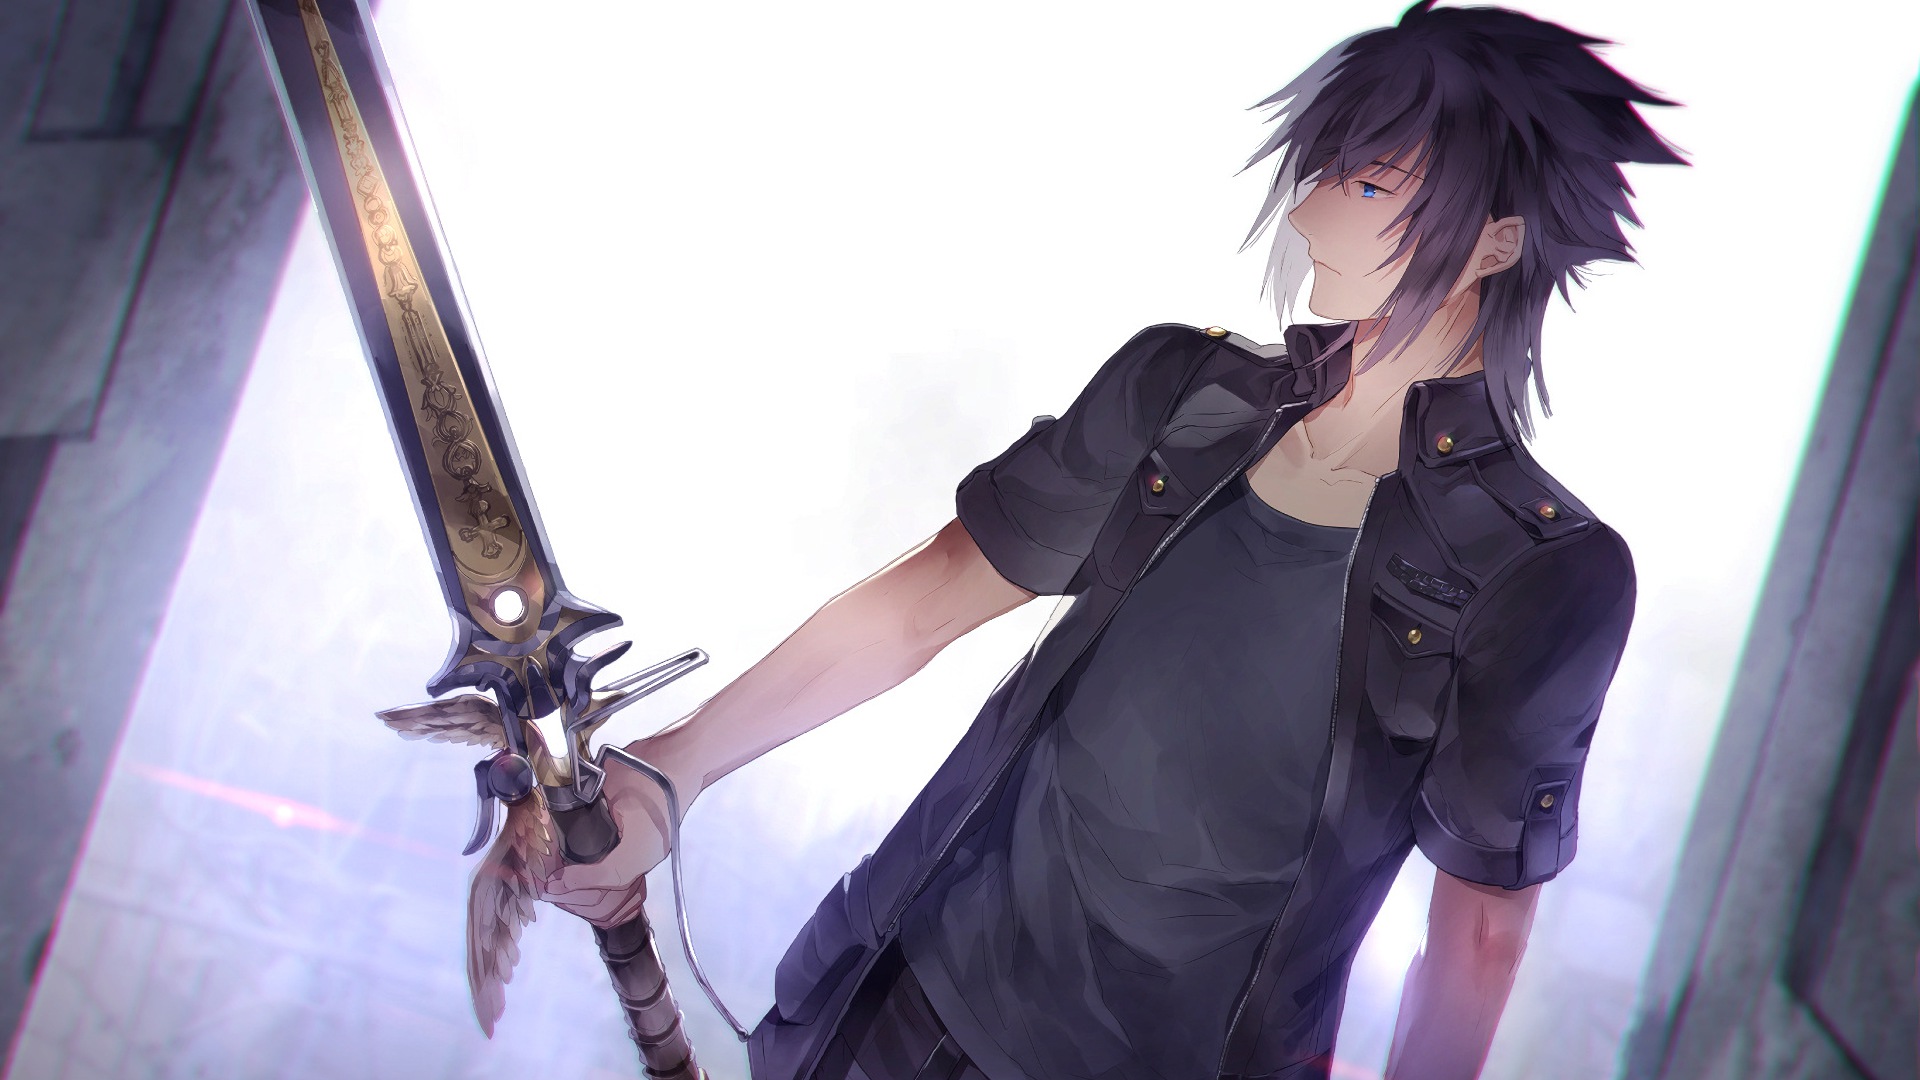 Wallpaper Final fantasy, noctis with sword, video game